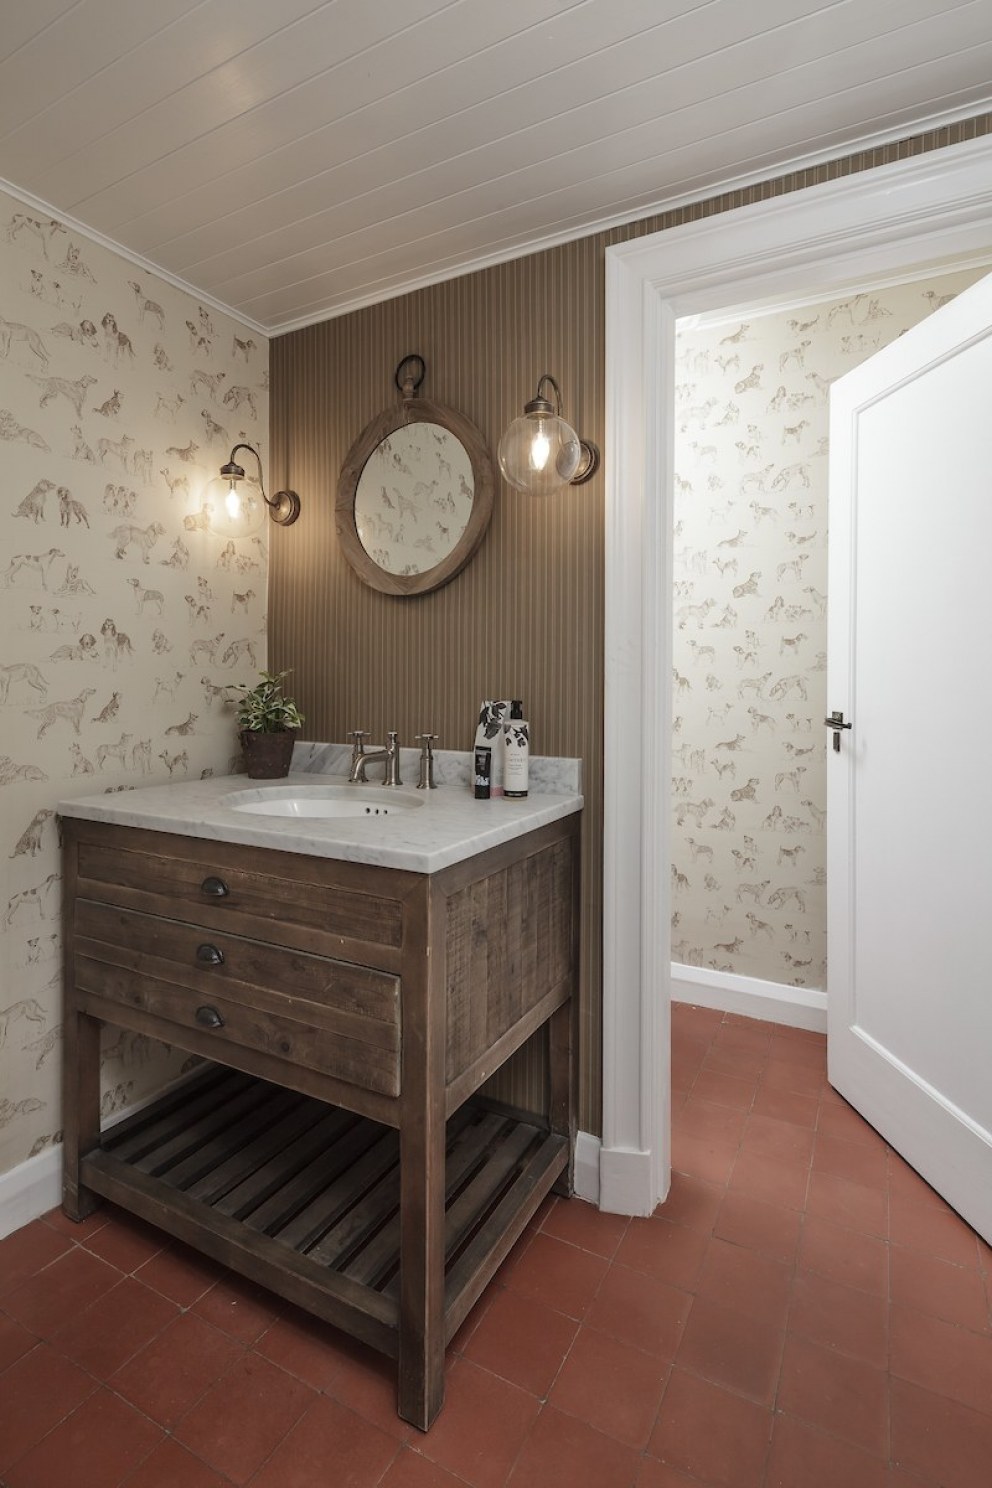 Country House Living, Peaslake, Surrey Hills | Country house cloakroom  | Interior Designers